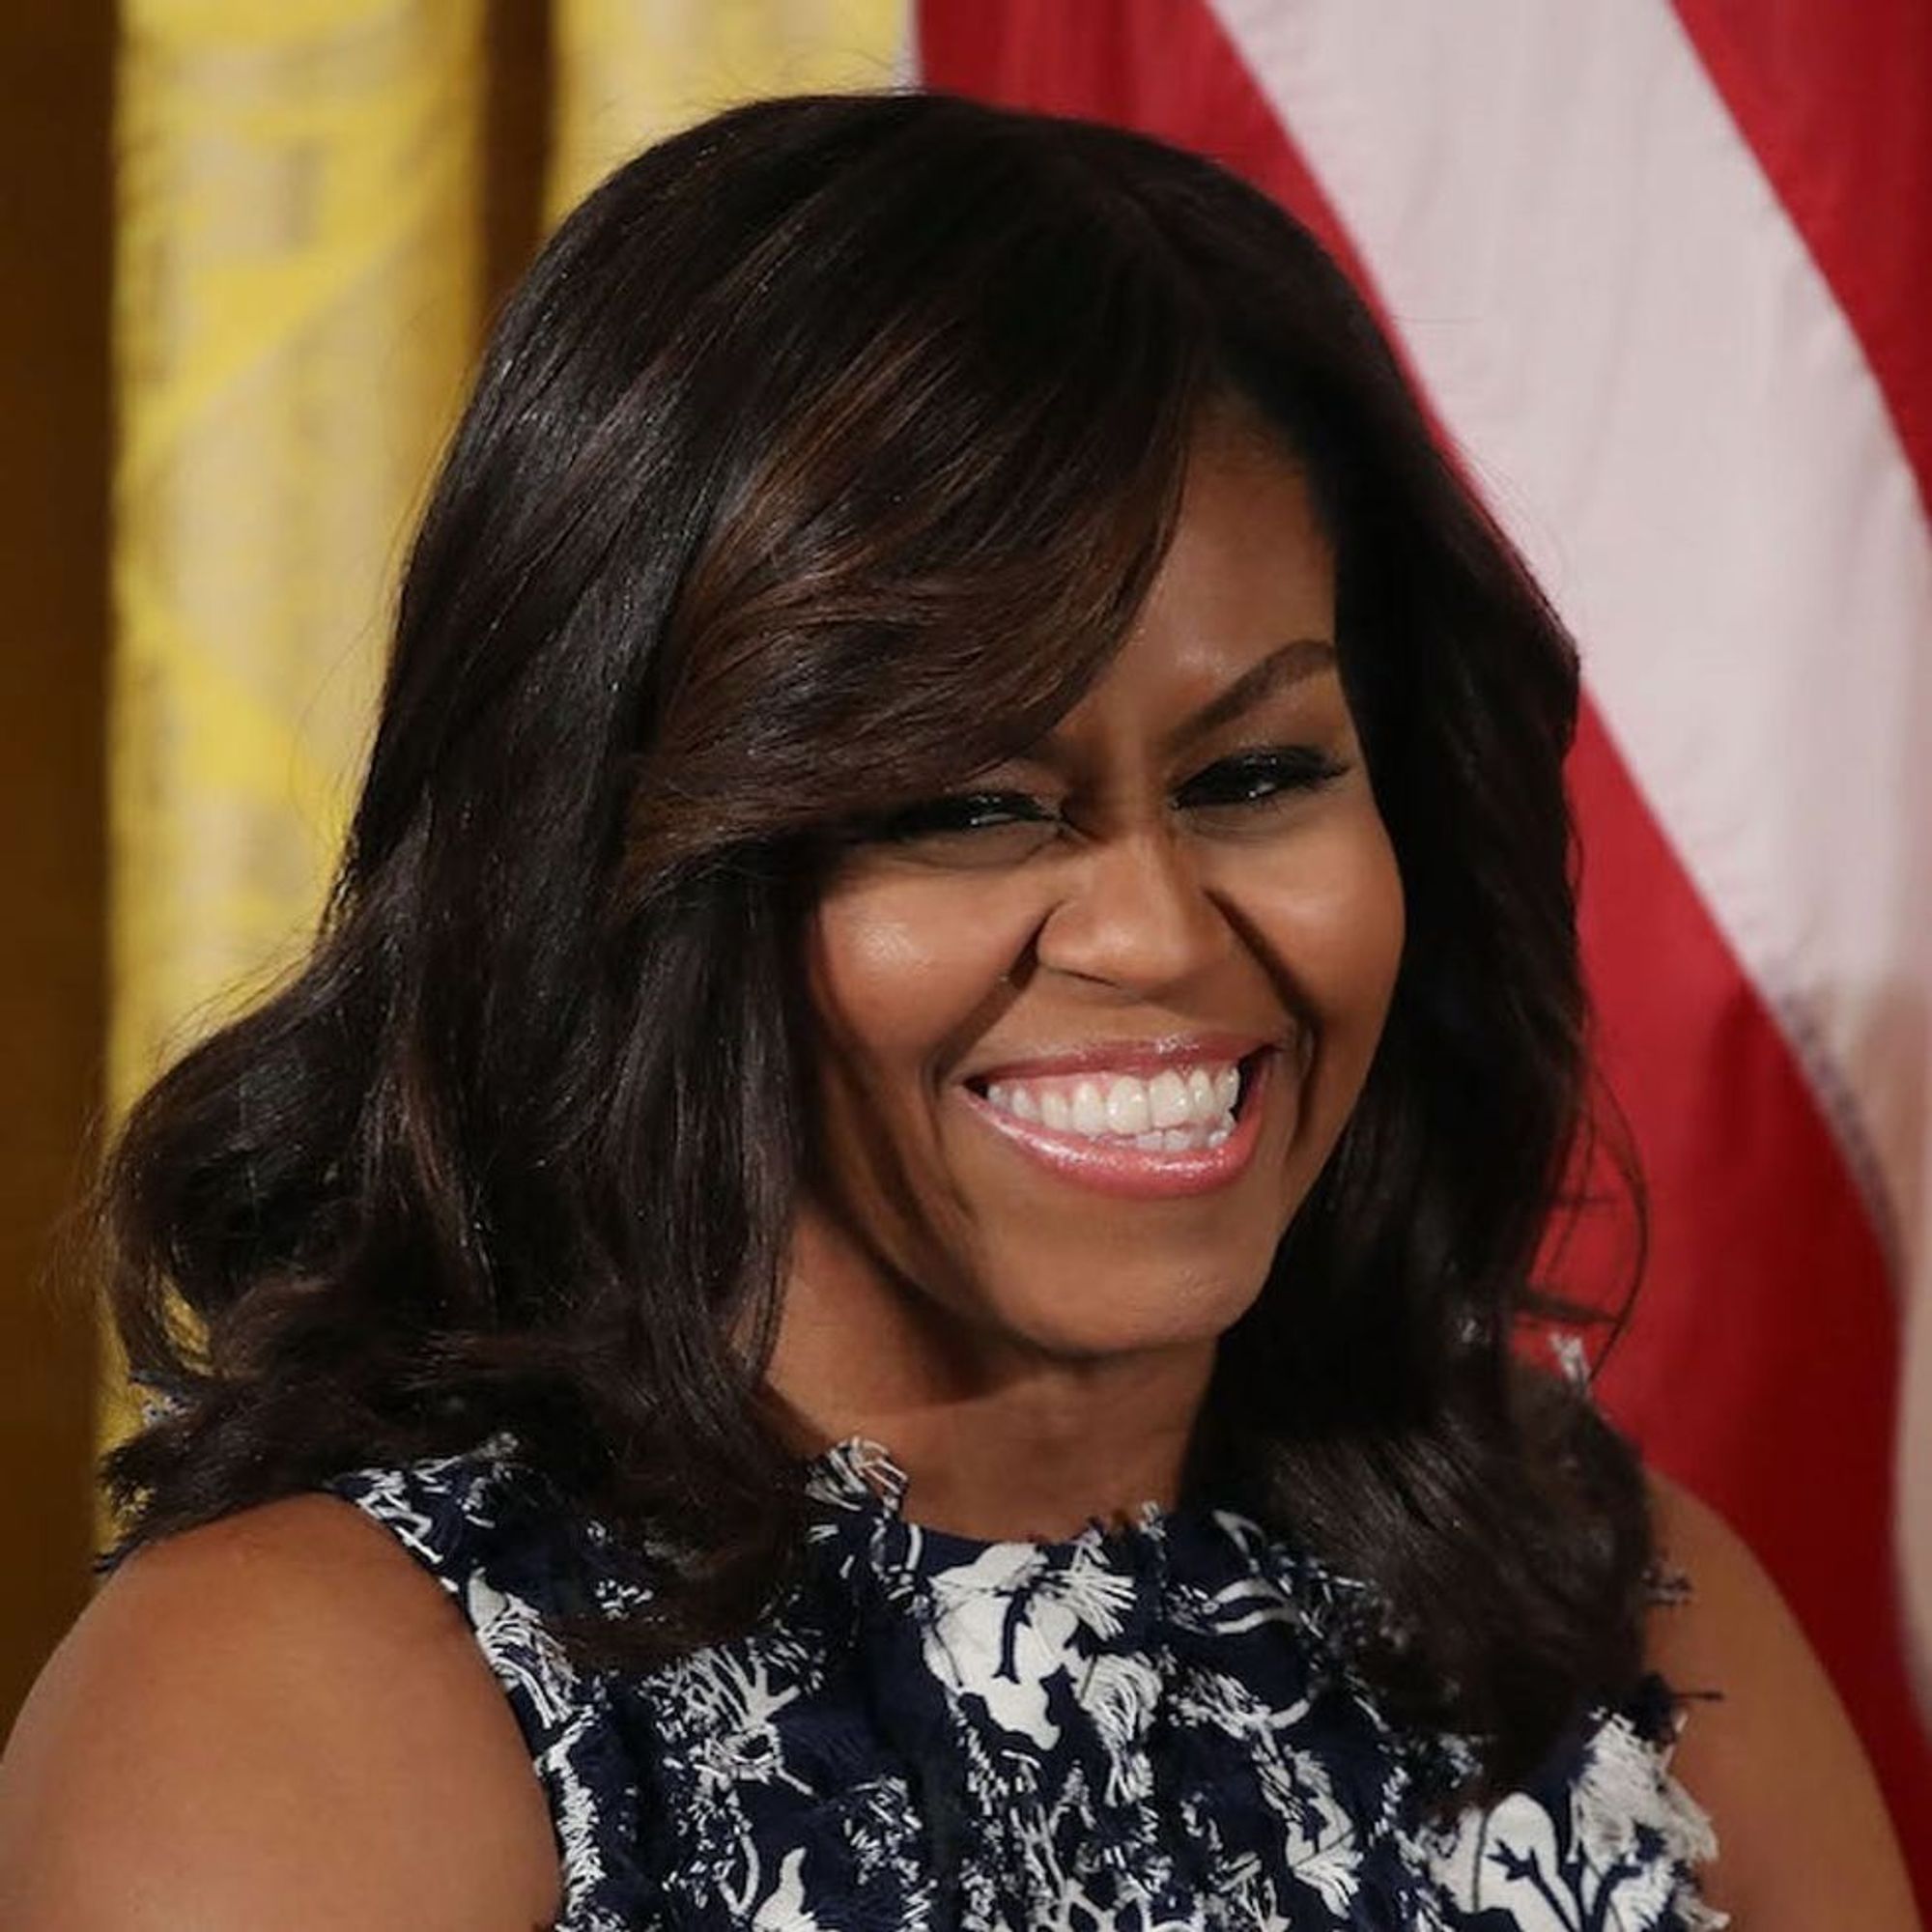 Michelle Obama’s Natural Hair Has the Internet Going Nuts - Brit + Co